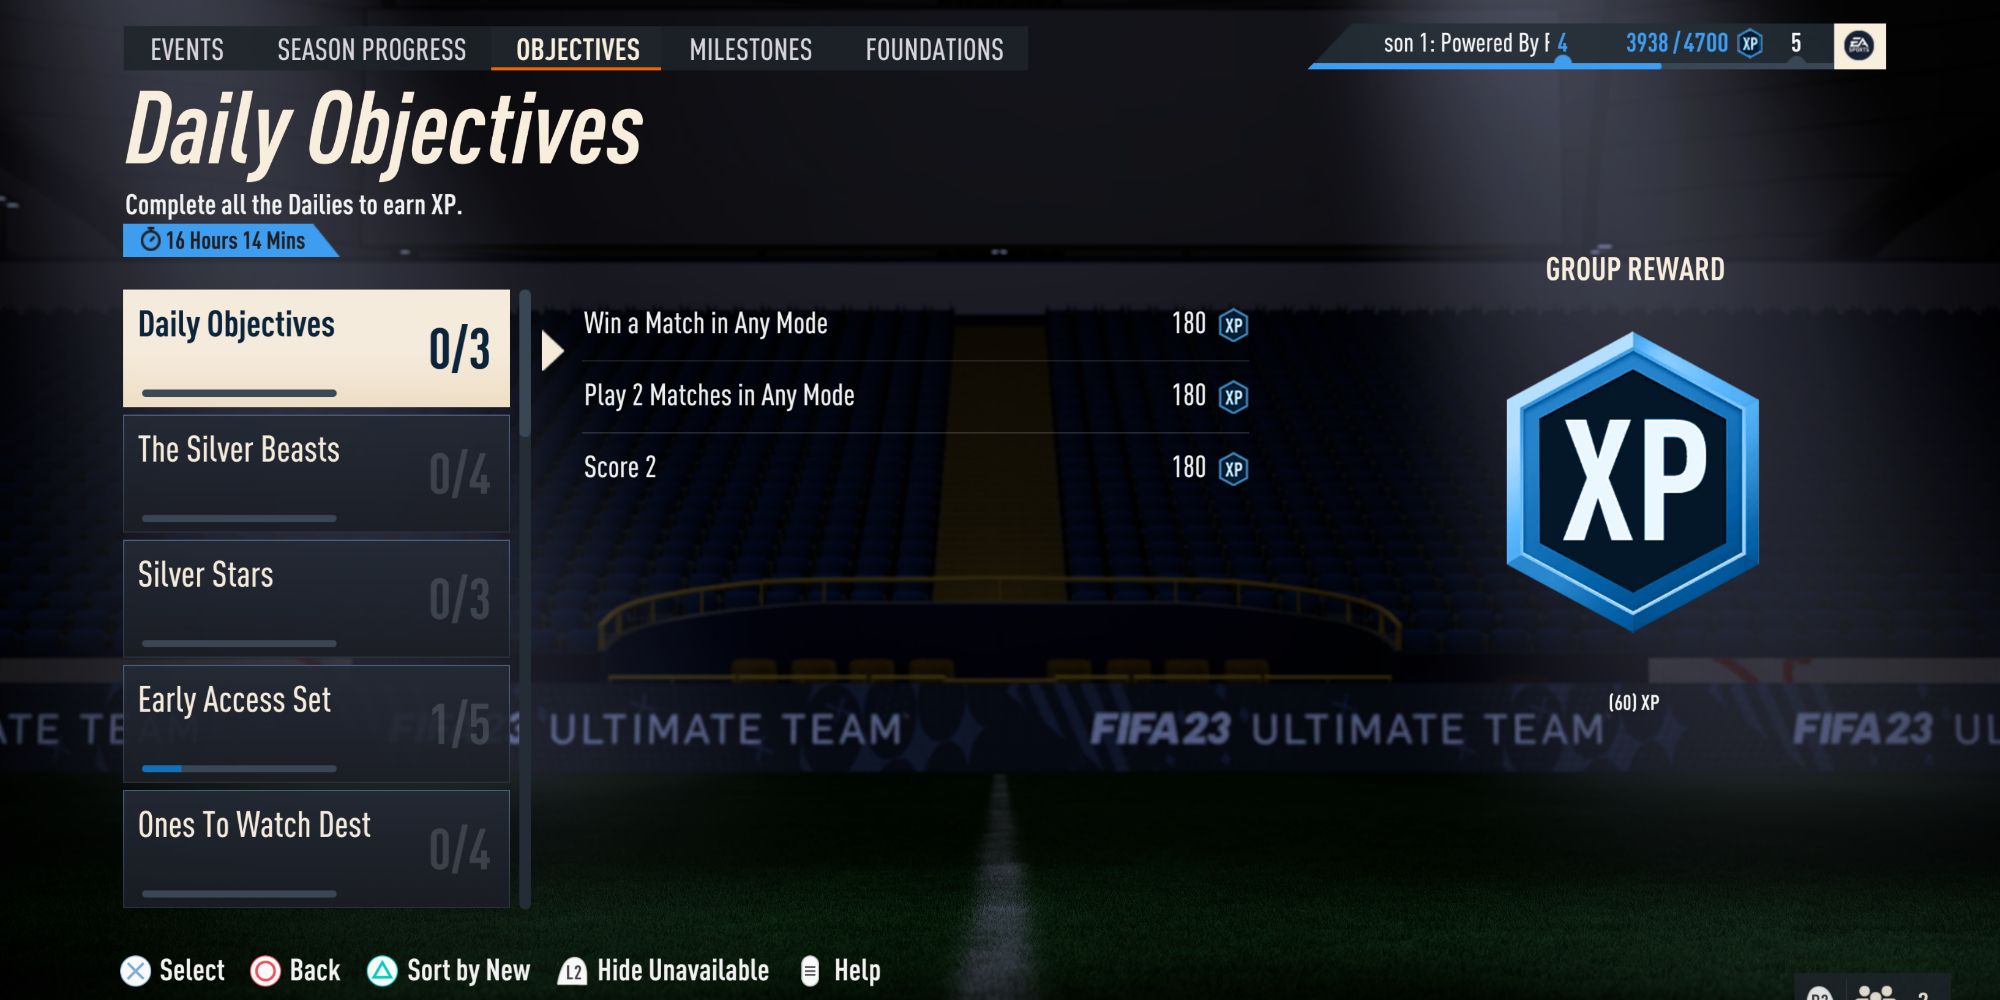 The Daily Objectives screen for FUT in FIFA 23.